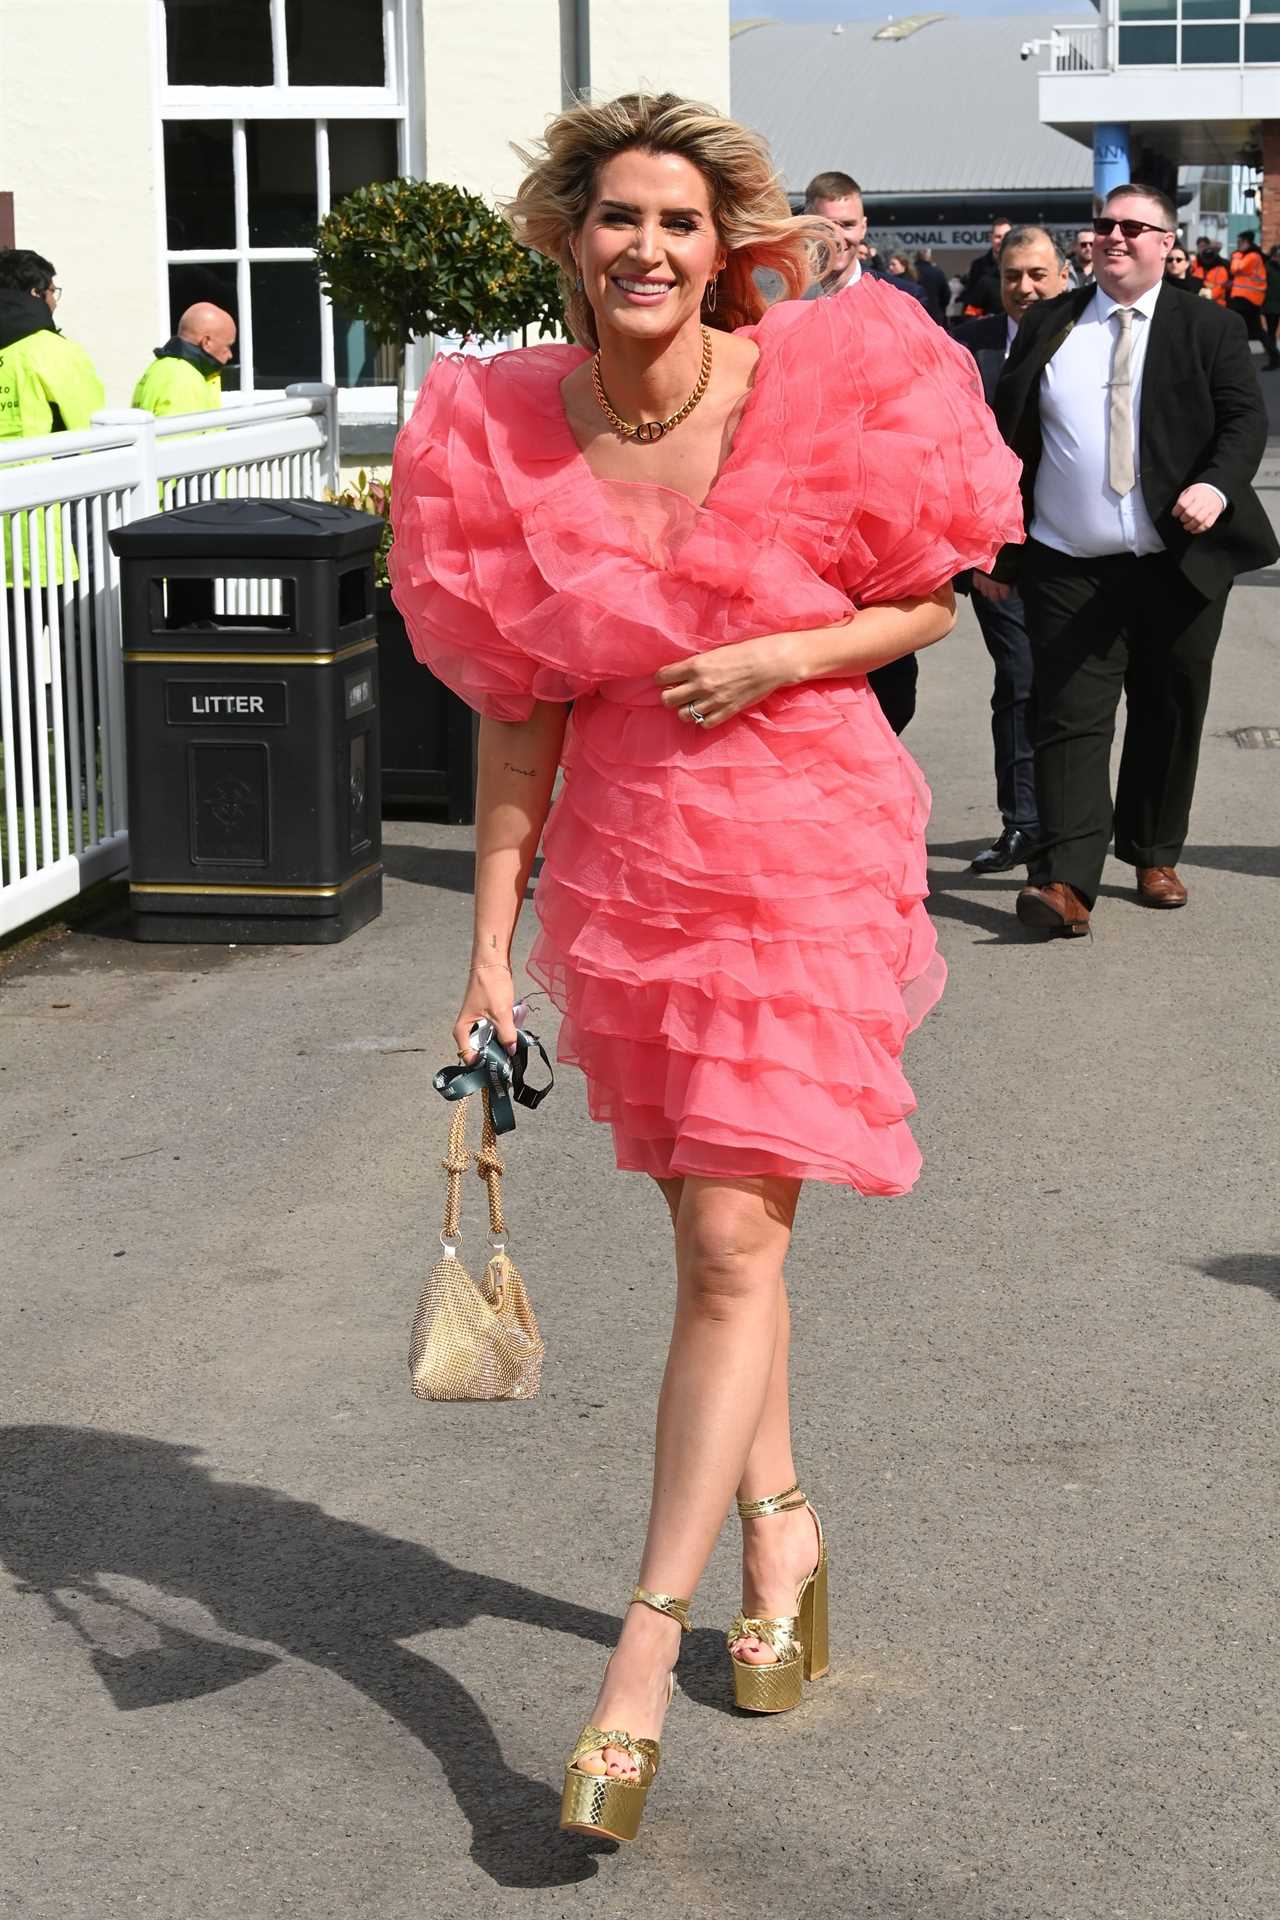 Sarah Jayne Dunn stuns as she goes braless in bright pink dress for day at the races